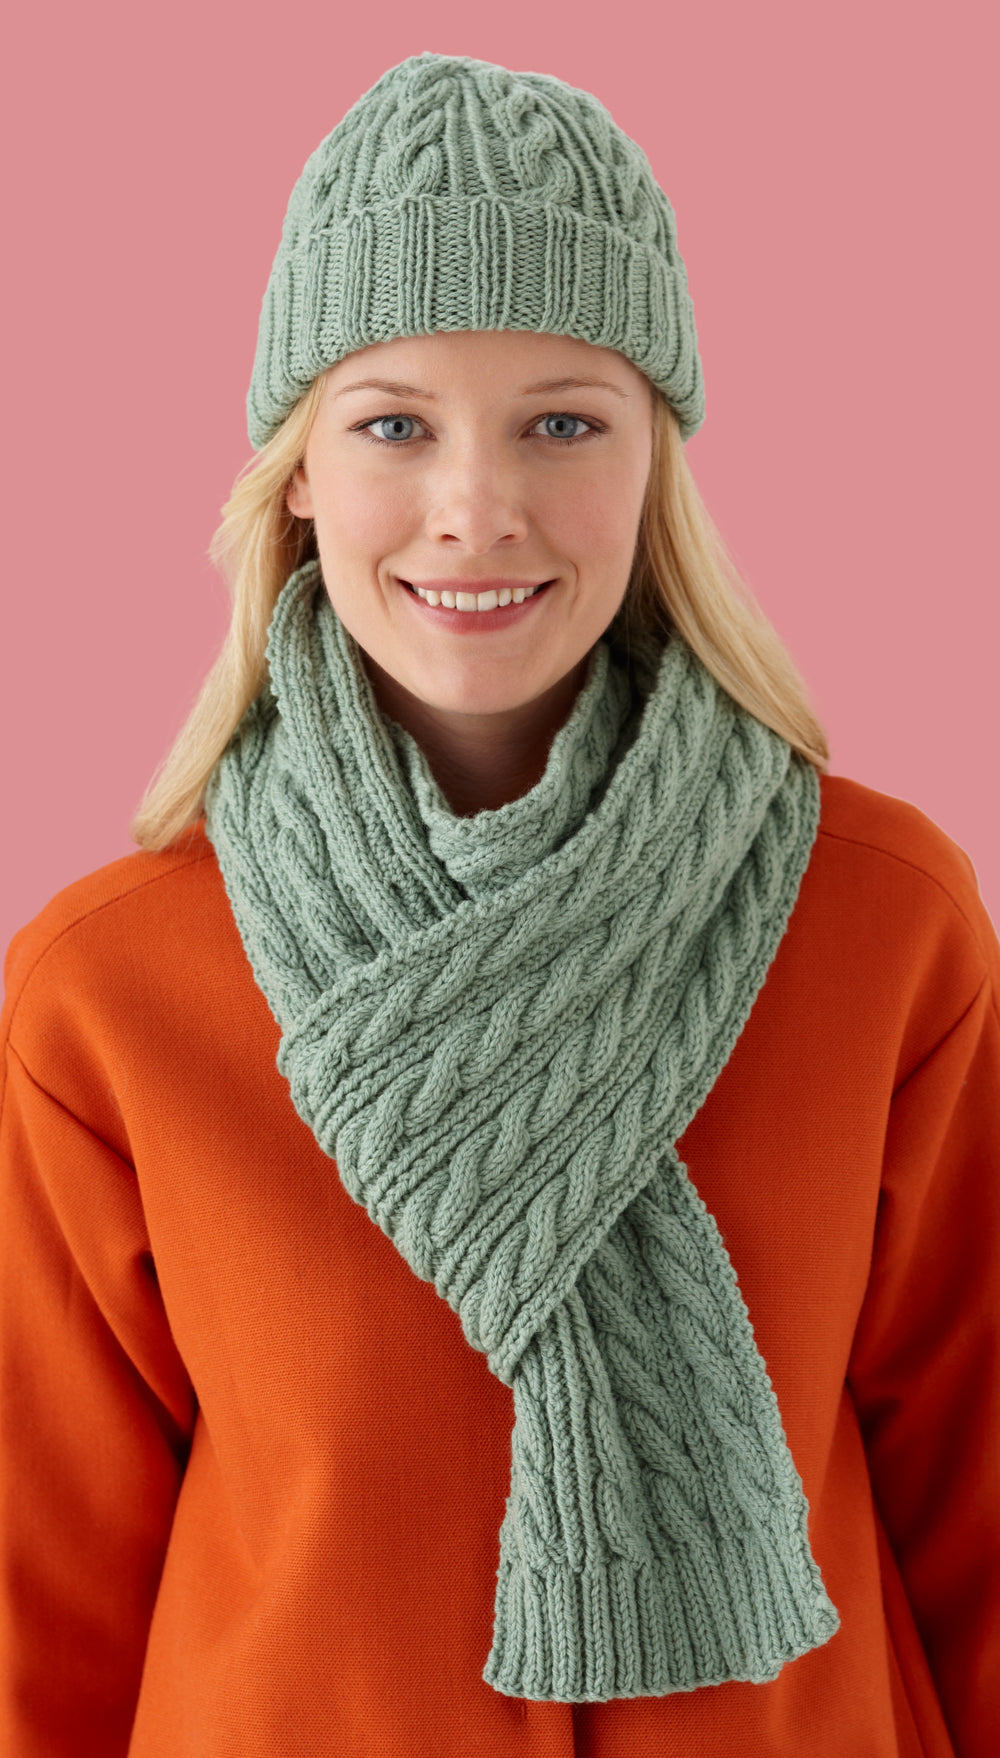 Gift-boxed scarf and beanie hat set